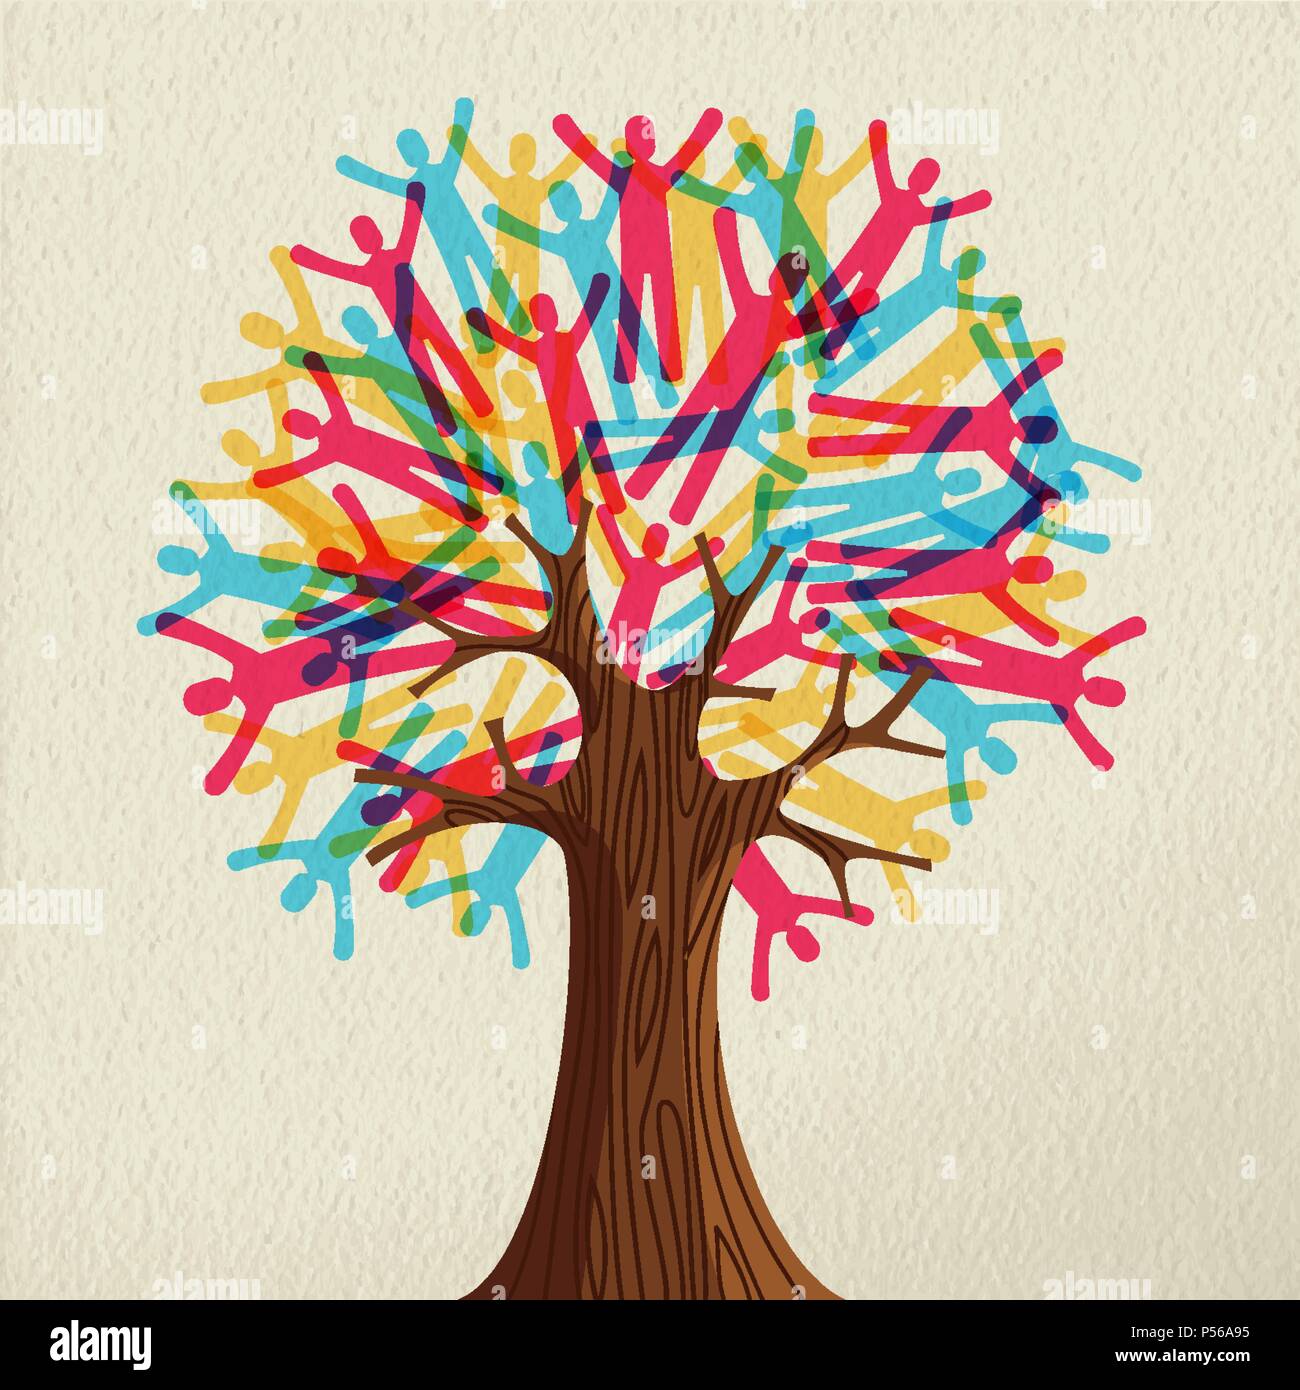 Tree symbol made of colorful people silhouettes. Concept illustration for community help, environment project or culture diversity. EPS10 vector. Stock Vector